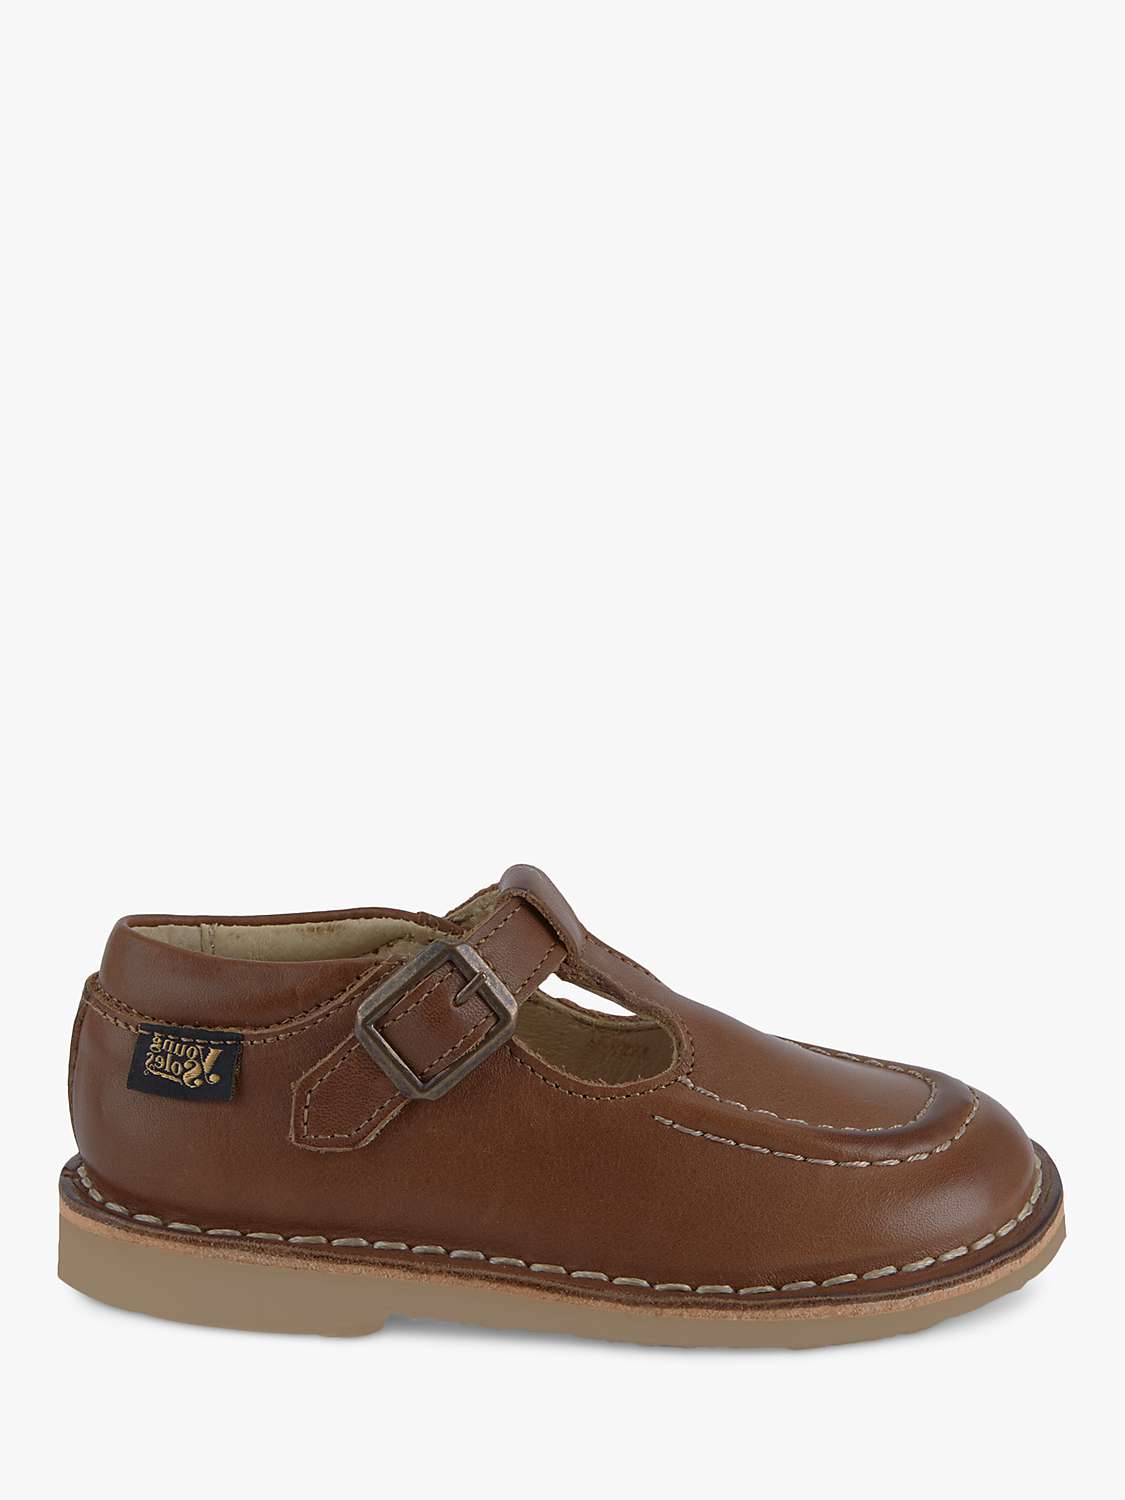 Buy Young Soles Kids' Parker T-Bar Leather Shoes Online at johnlewis.com